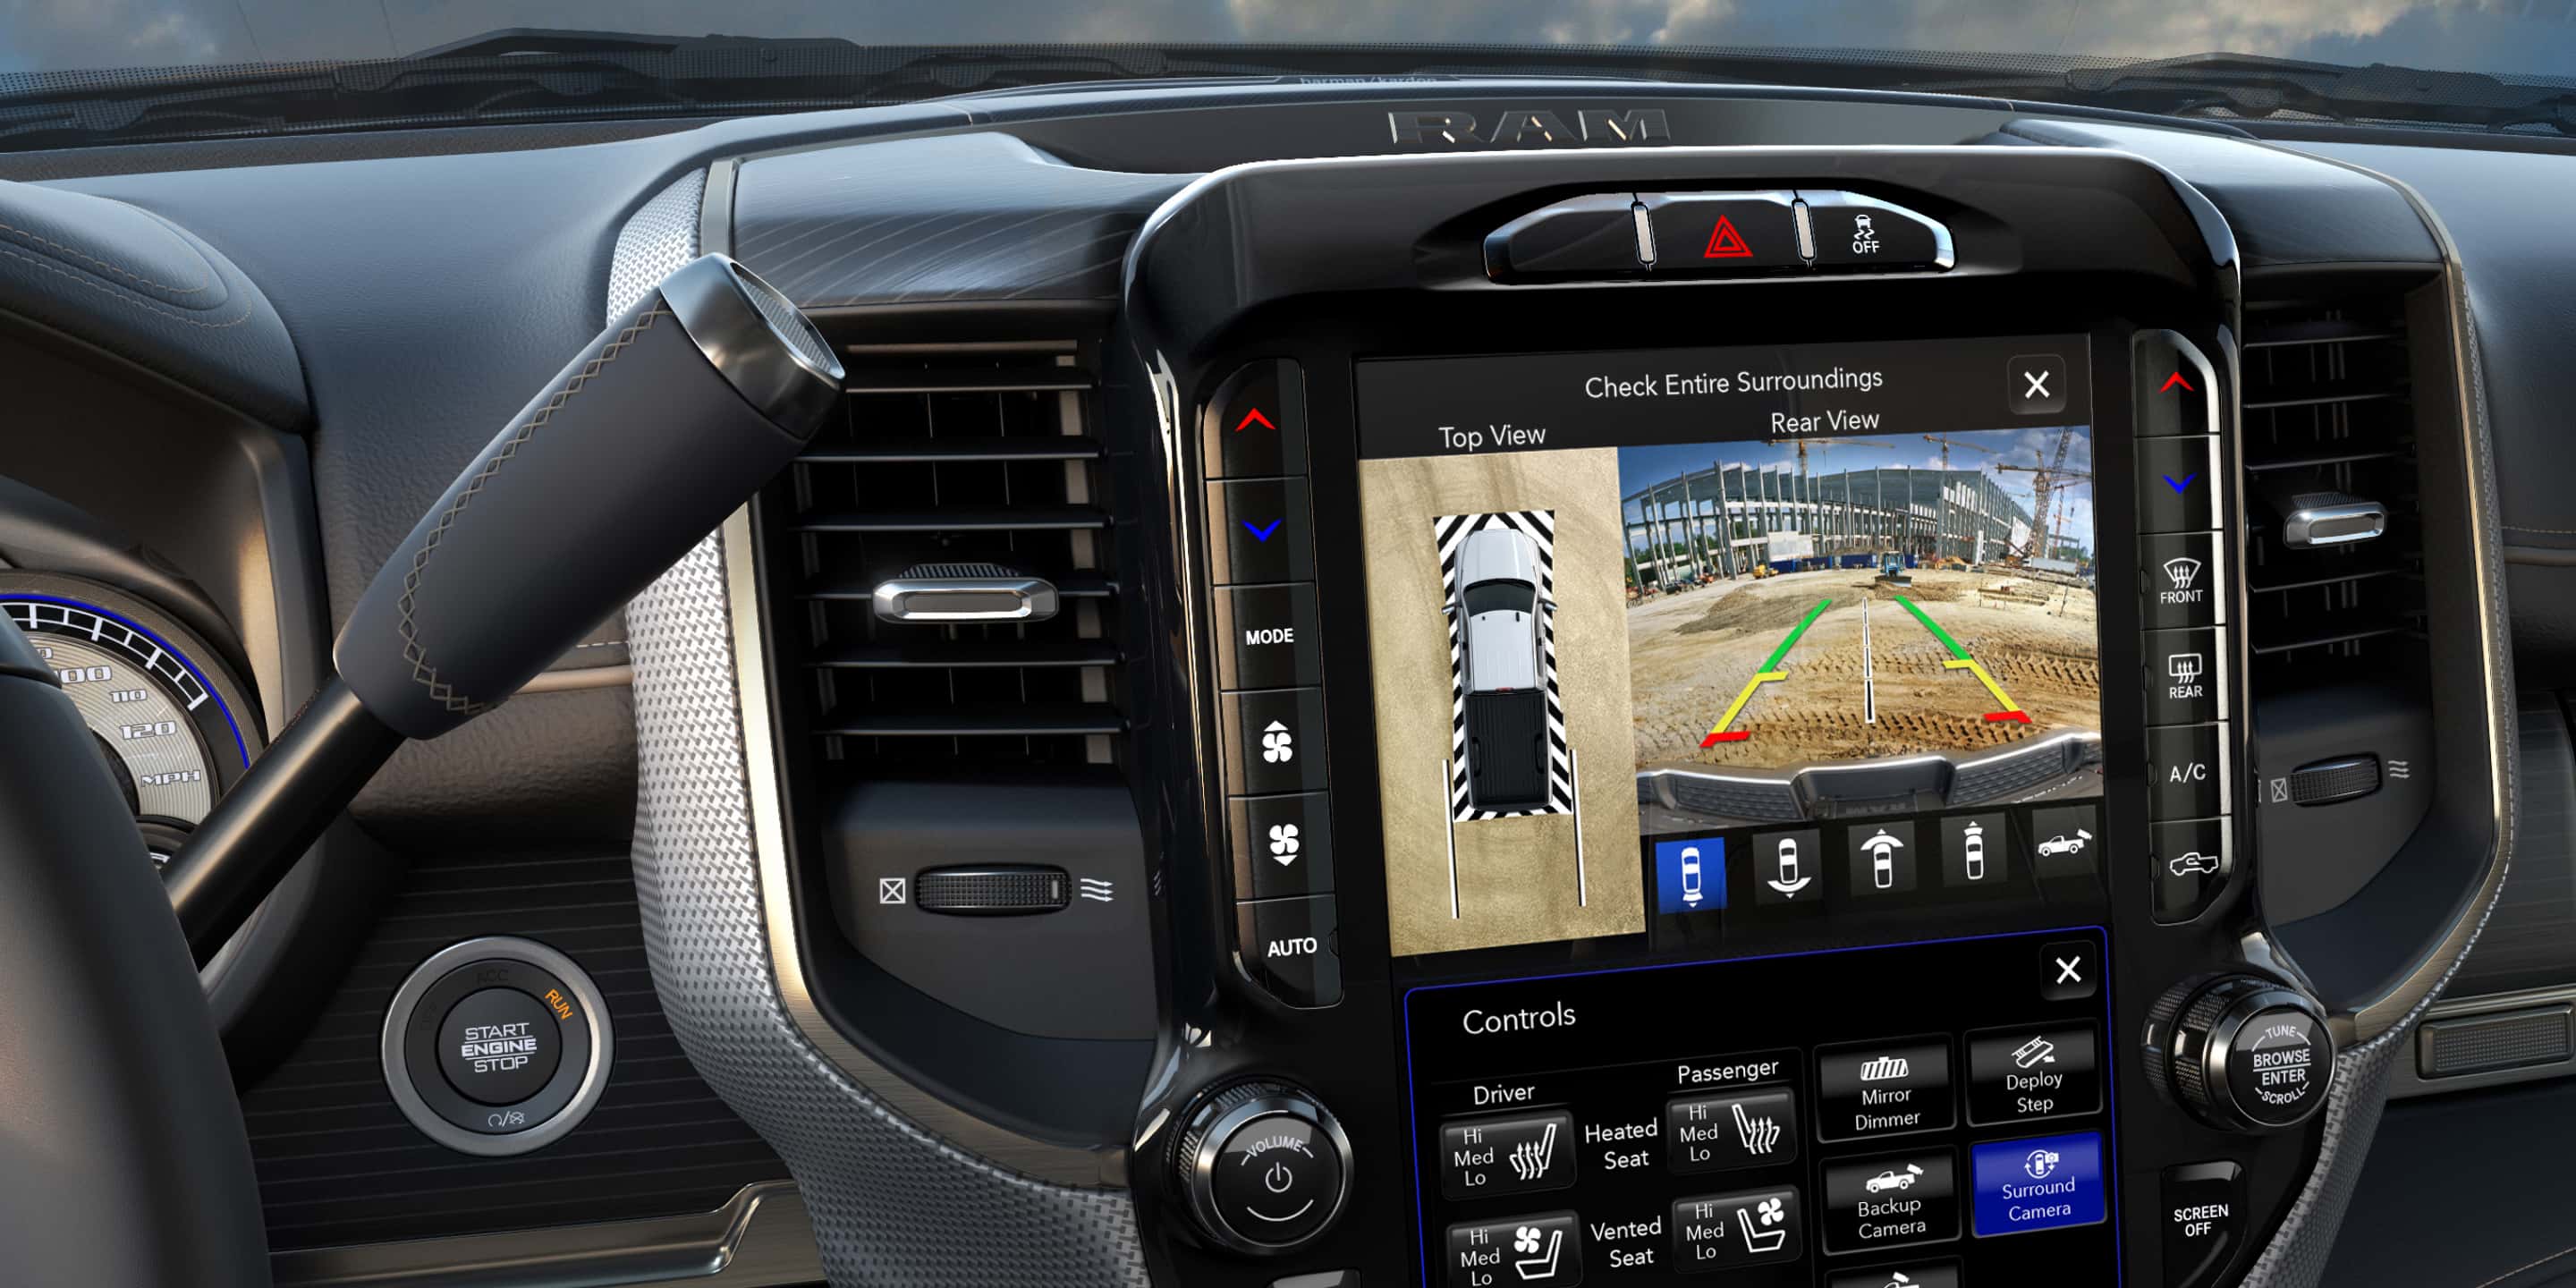 A close-up of the Uconnect touchscreen in the 2021 Ram 2500 displaying the vehicle from above and the area behind the vehicle courtesy of the surround view camera.